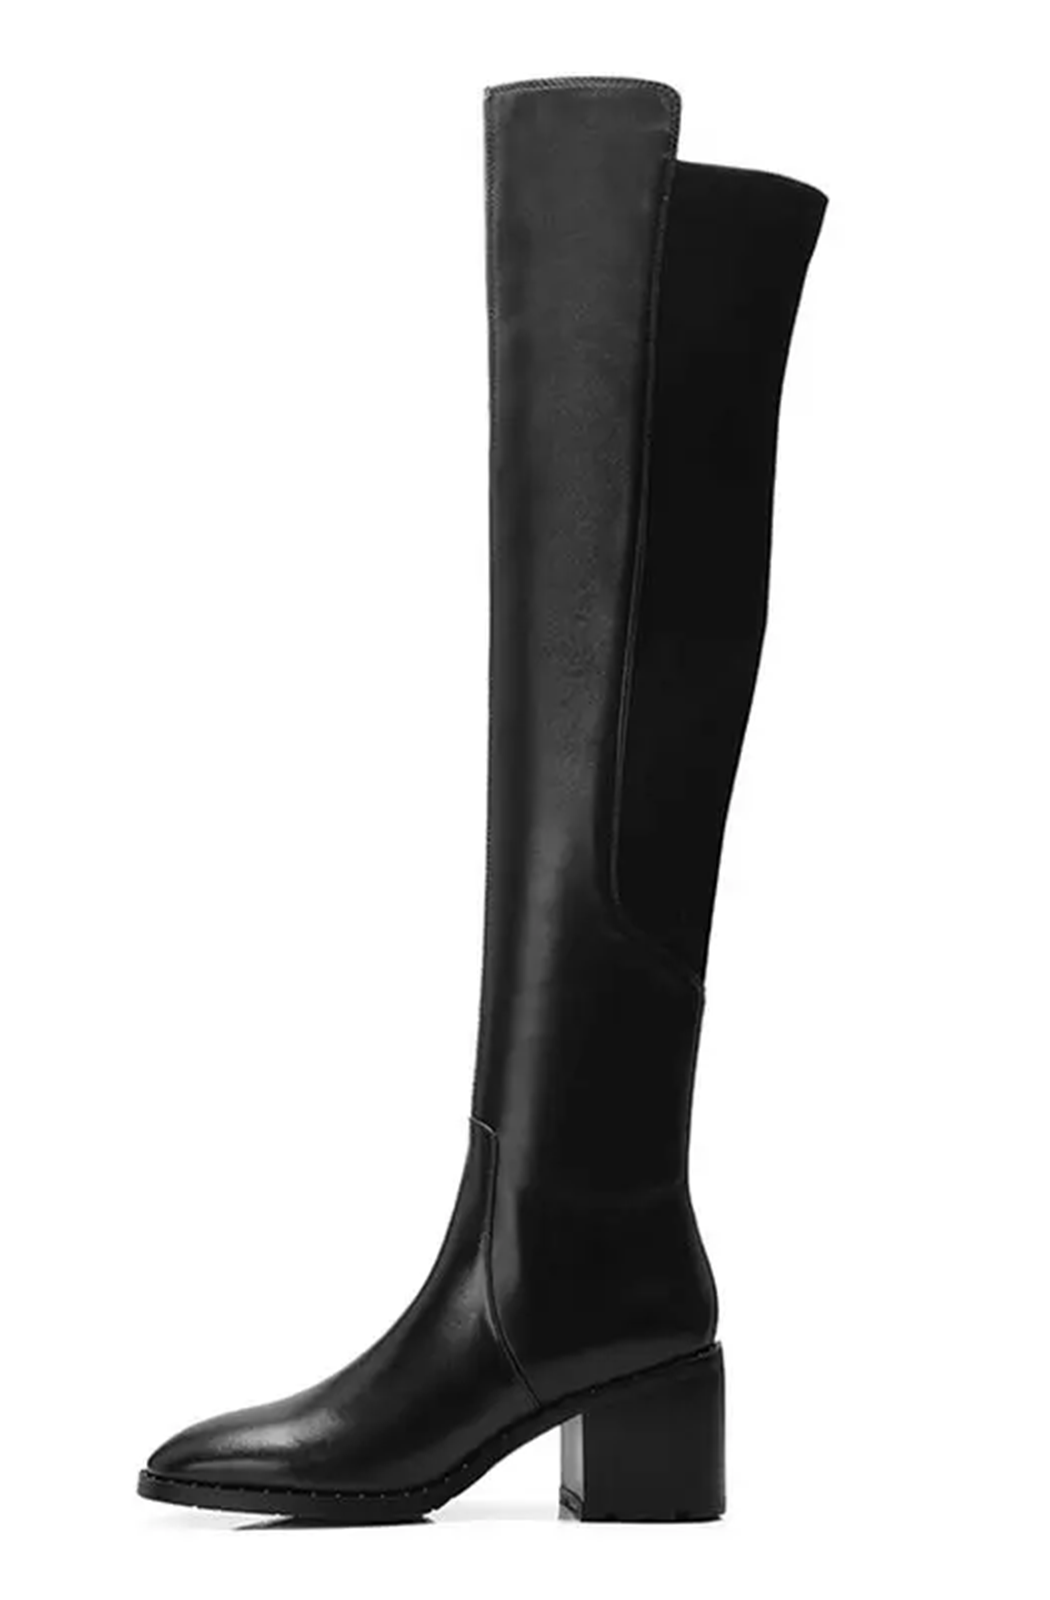 Genuine leather over the knee boots with elastic